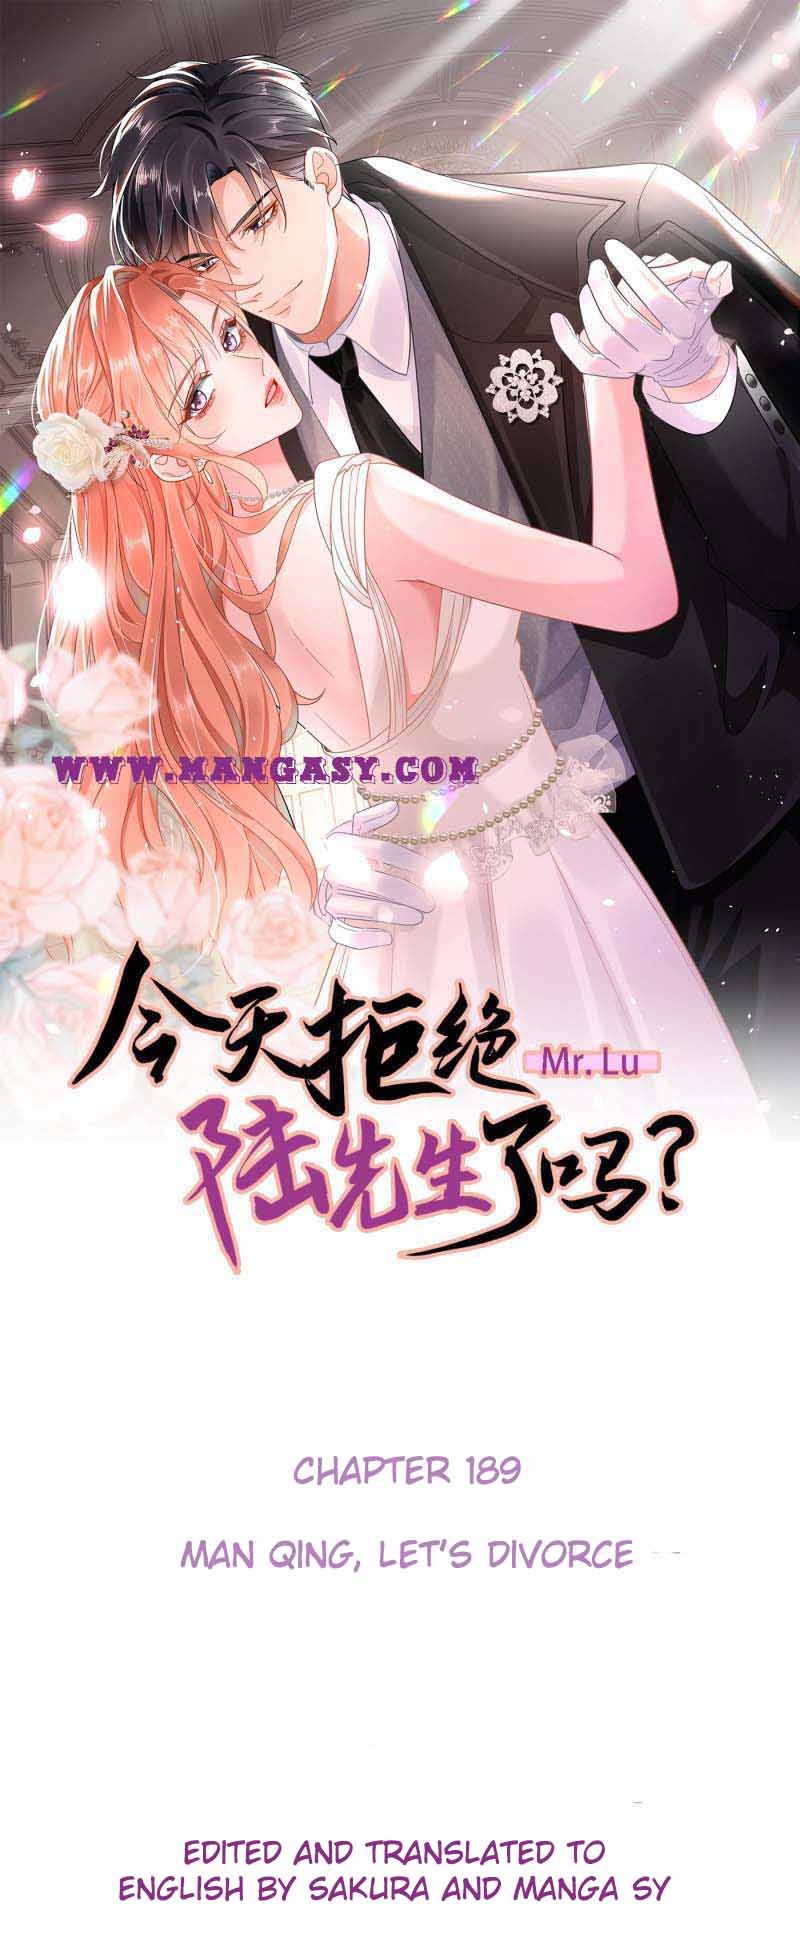 Chapter 189